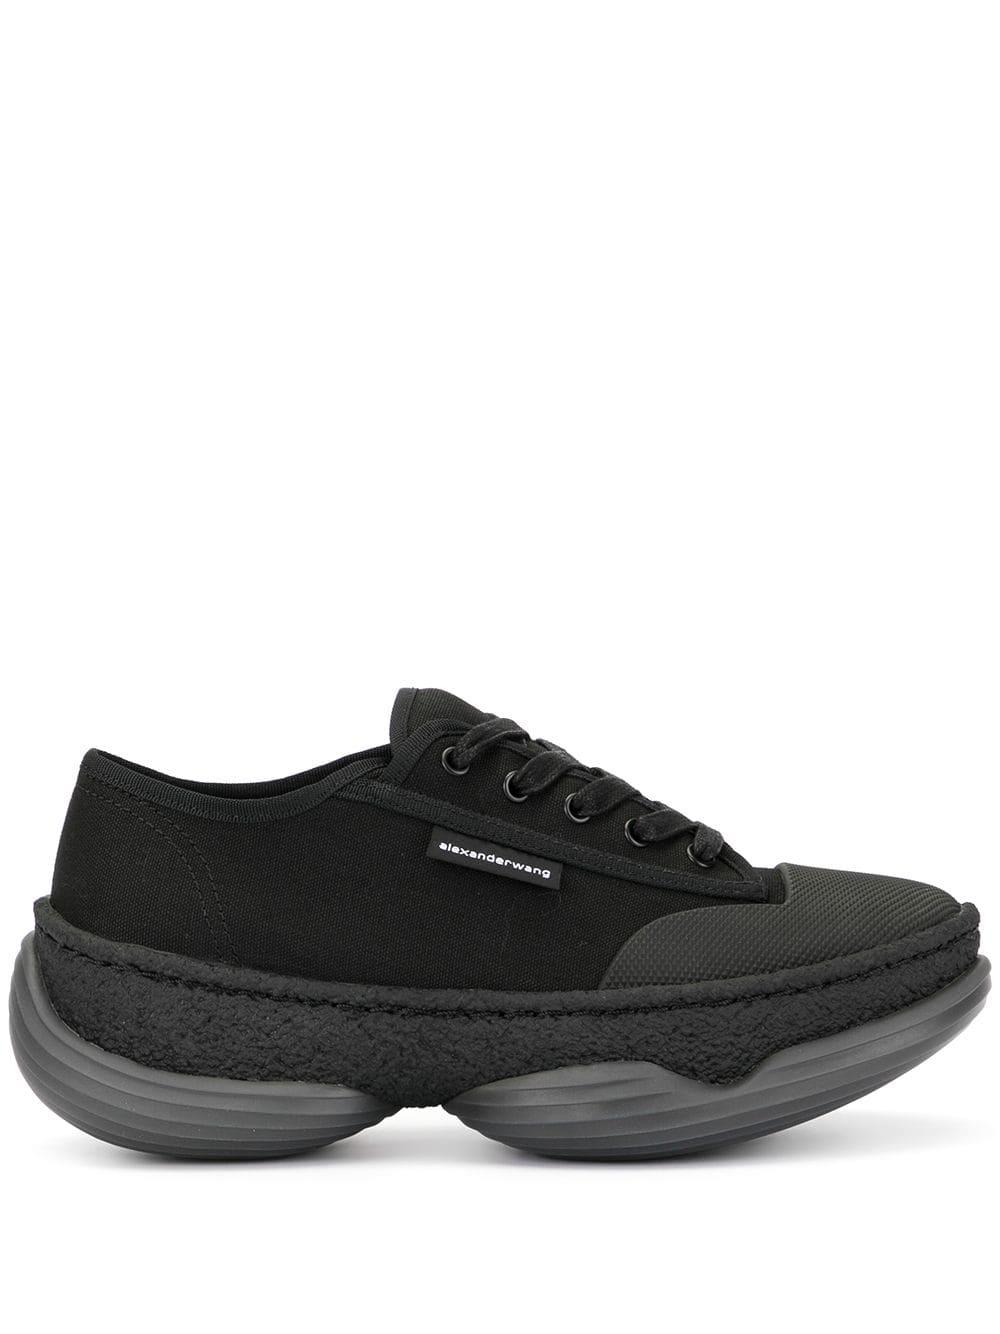 Alexander Wang Canvas A1 Low-top Sneakers in Black - Lyst